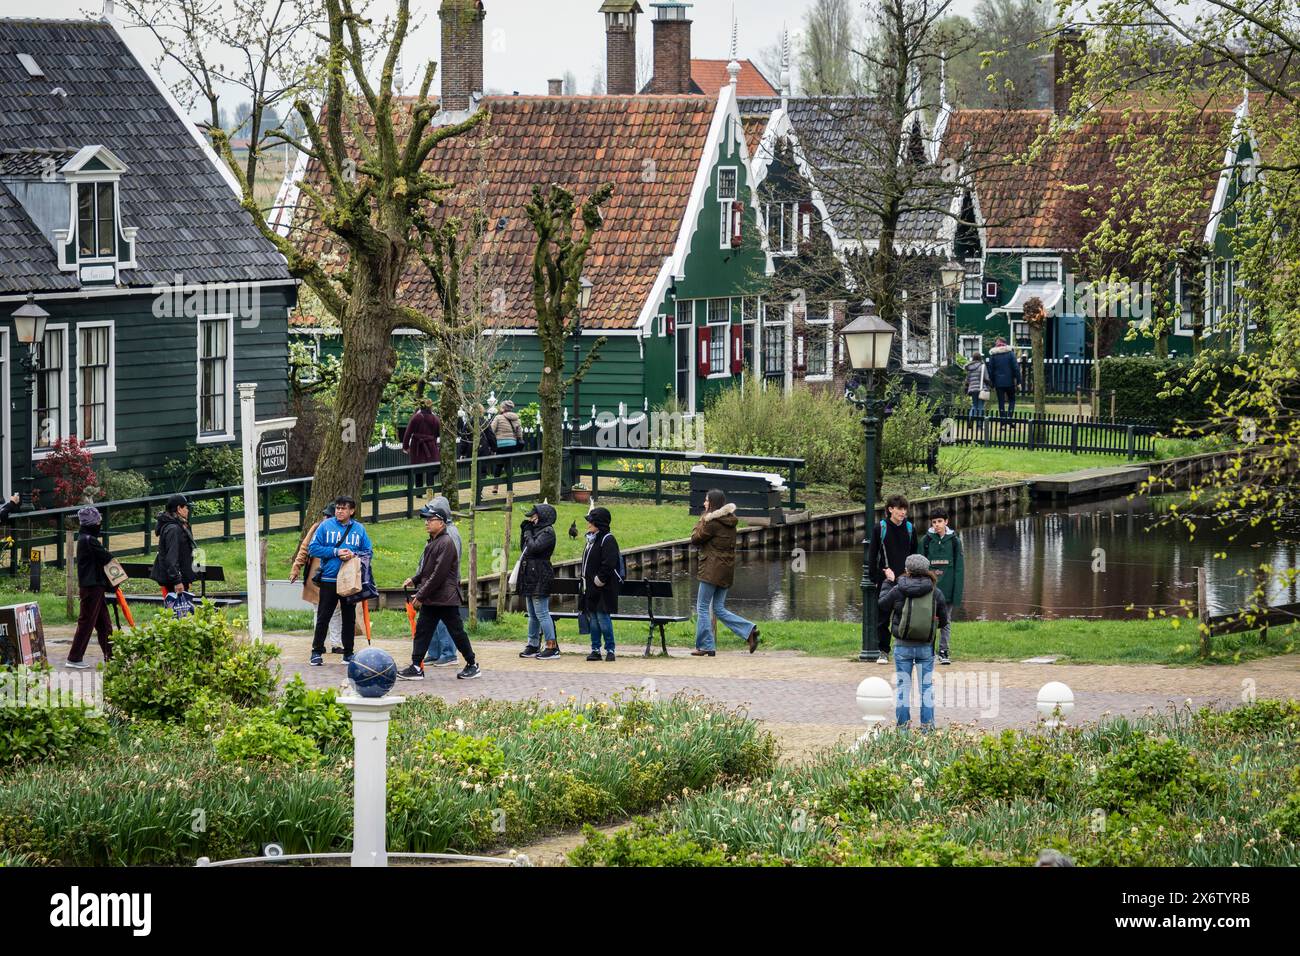 Zaanse Schans, typical traditional houses next to the canal, Zaanstad Municipality, European Route of Industrial Heritage, Netherlands. Stock Photo